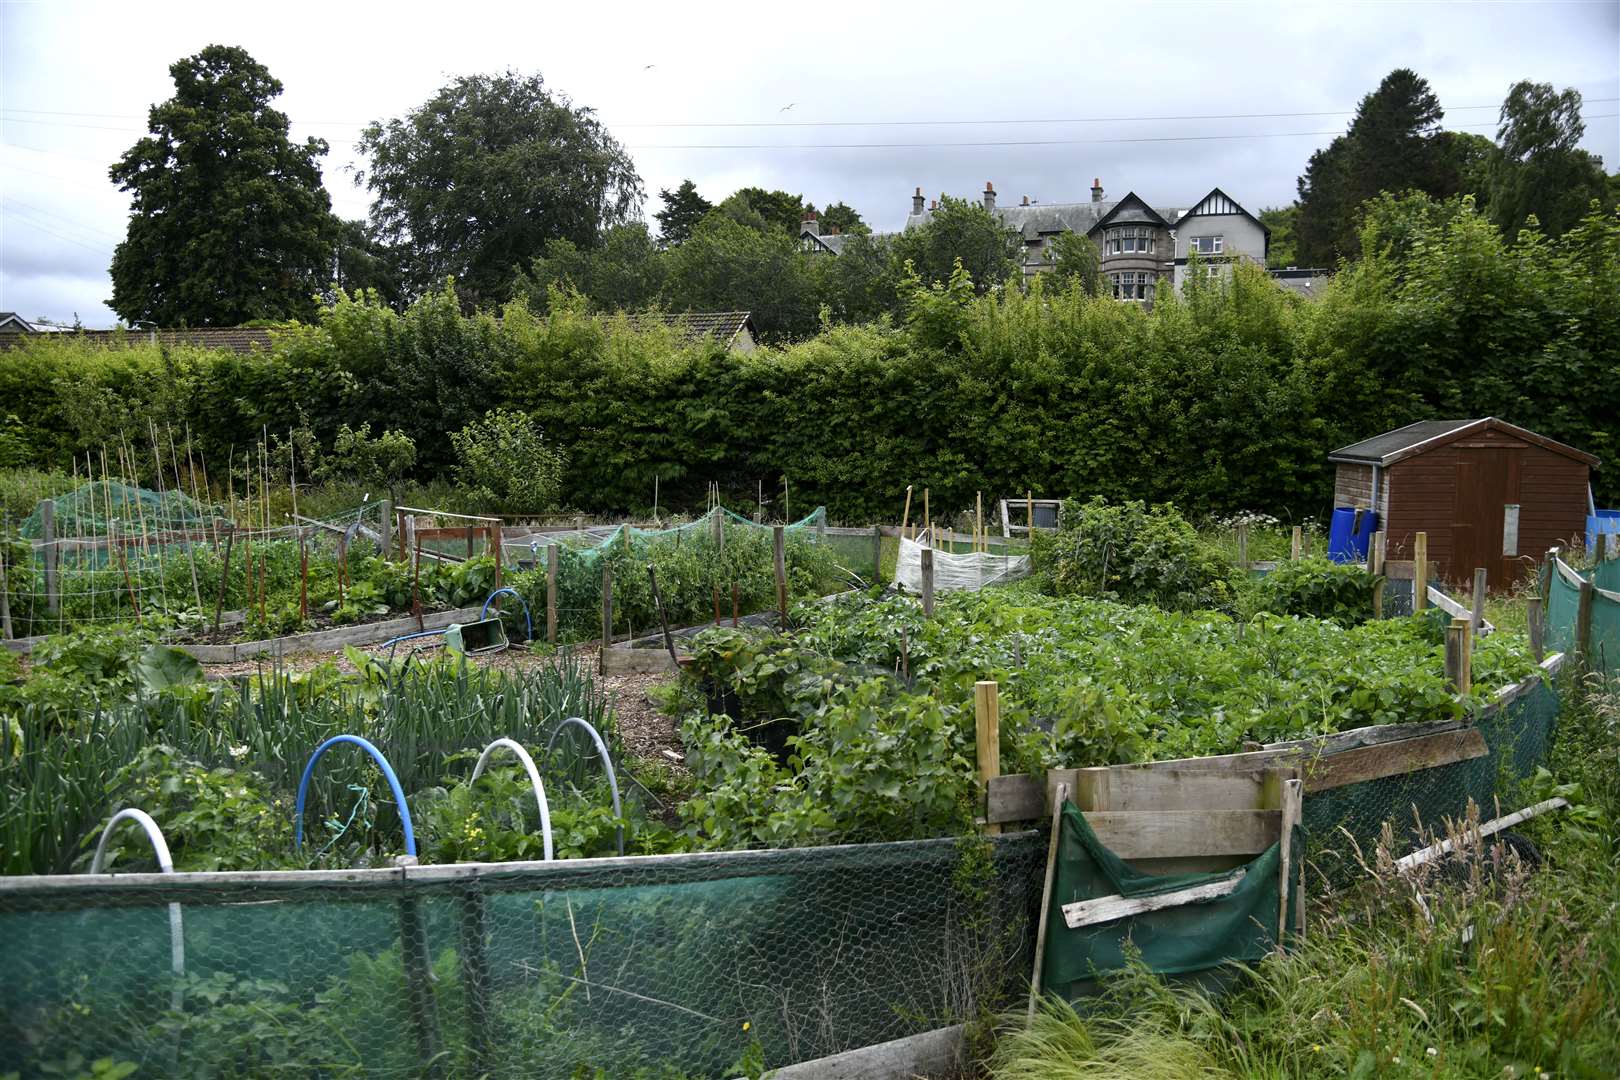 The Community Garden and allotments at Bogton. Picture: Beth Taylor